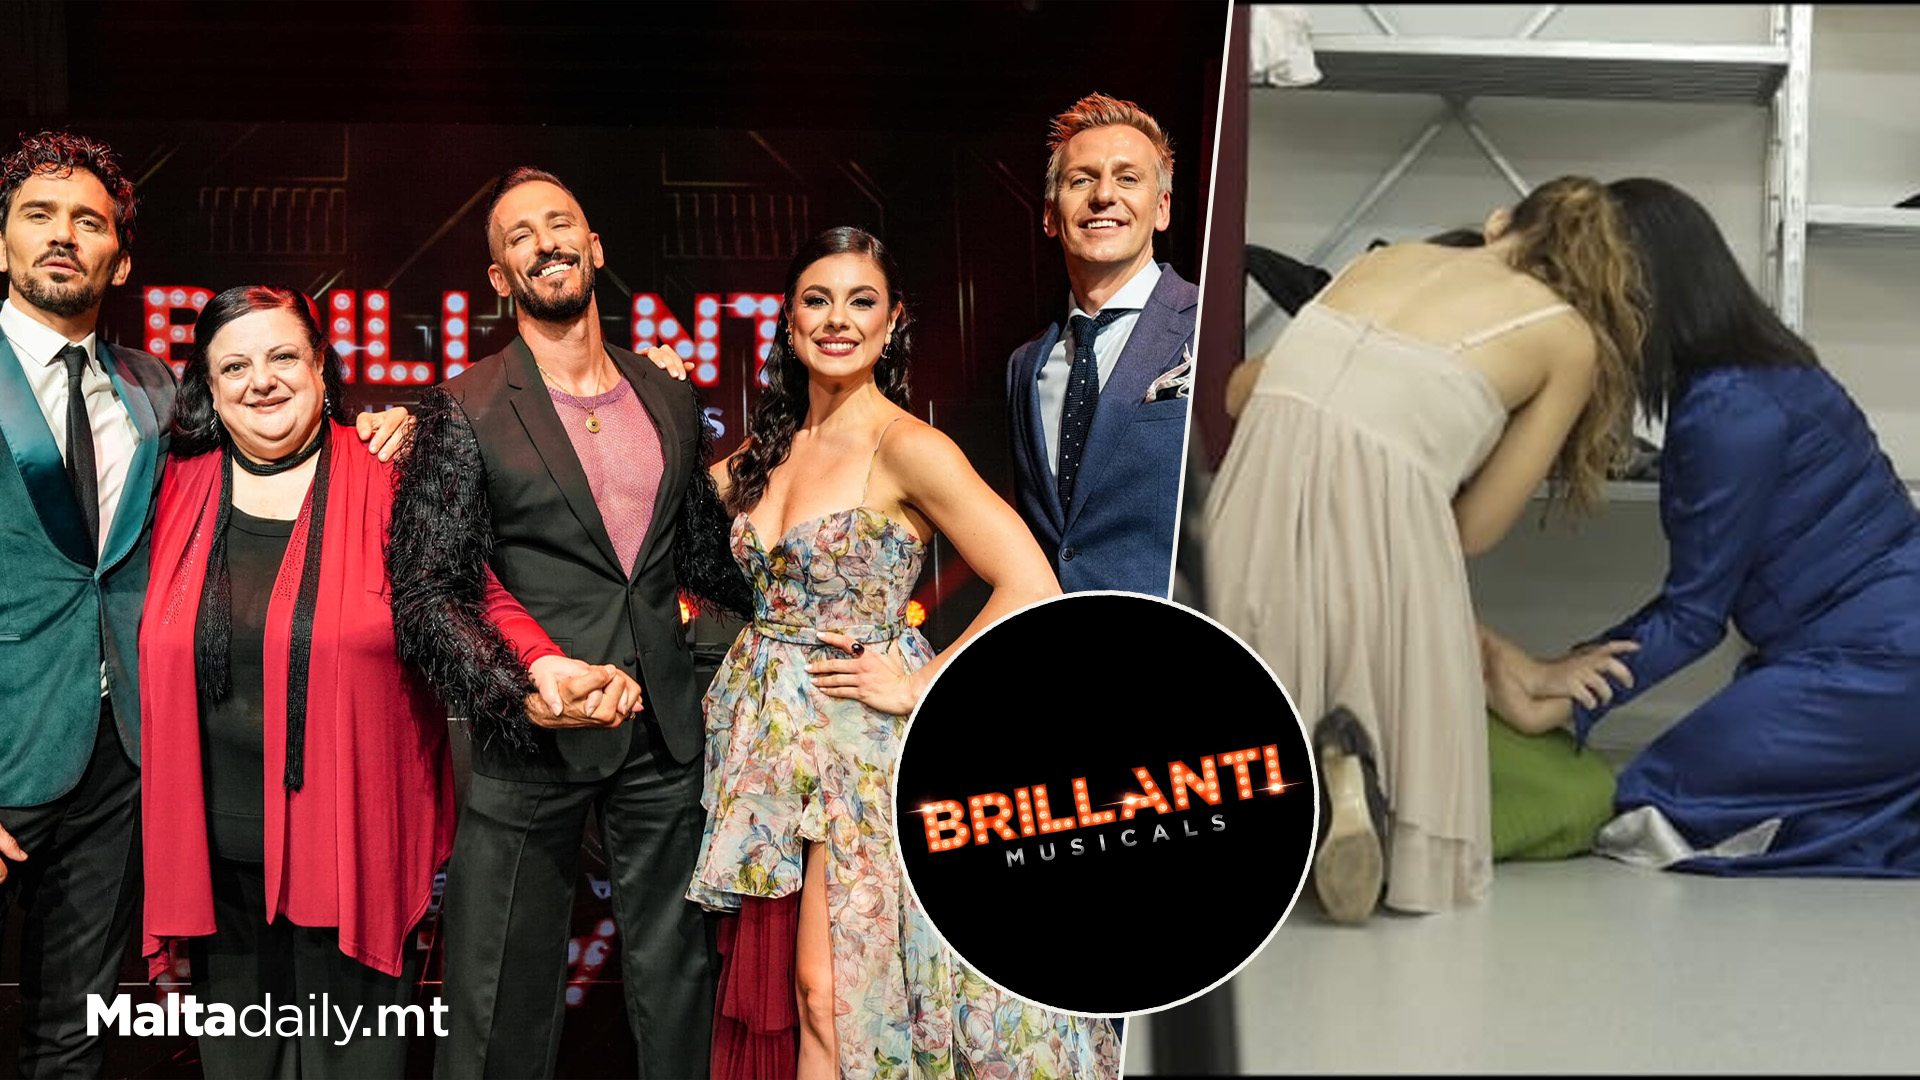 Brillanti Contestants Come Together In Support Of Each Other